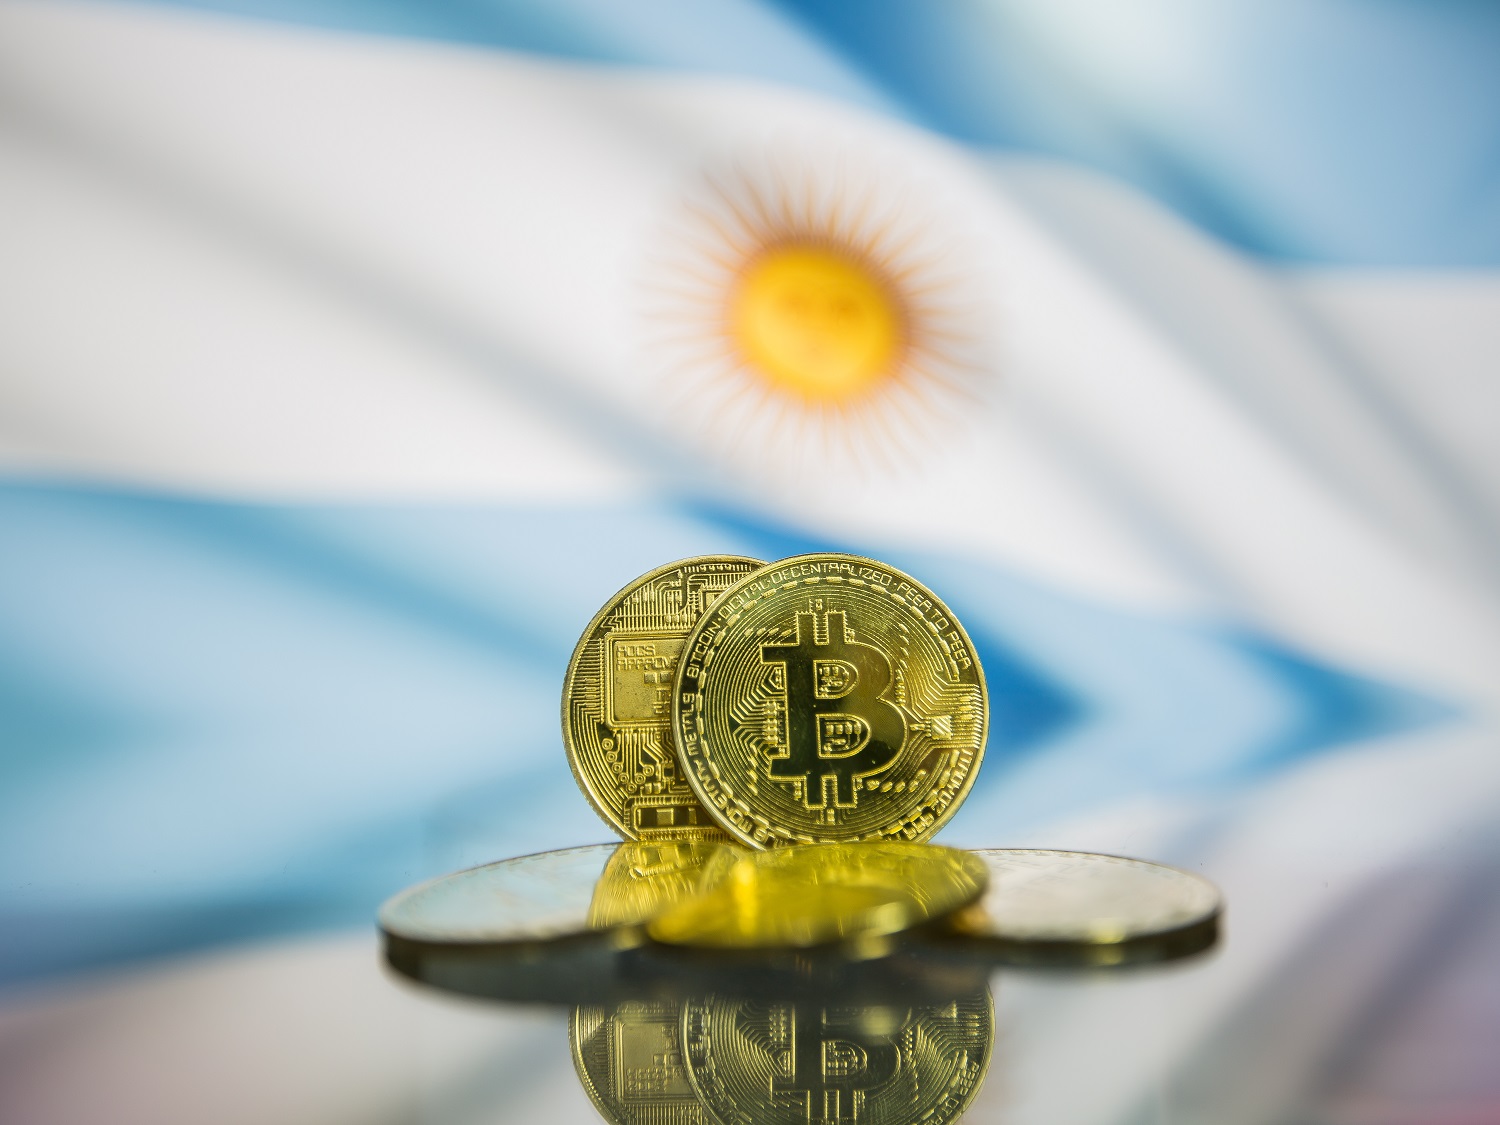 Five metal tokens intended to represent Bitcoin, against the backdrop of the Argentinian Flag.